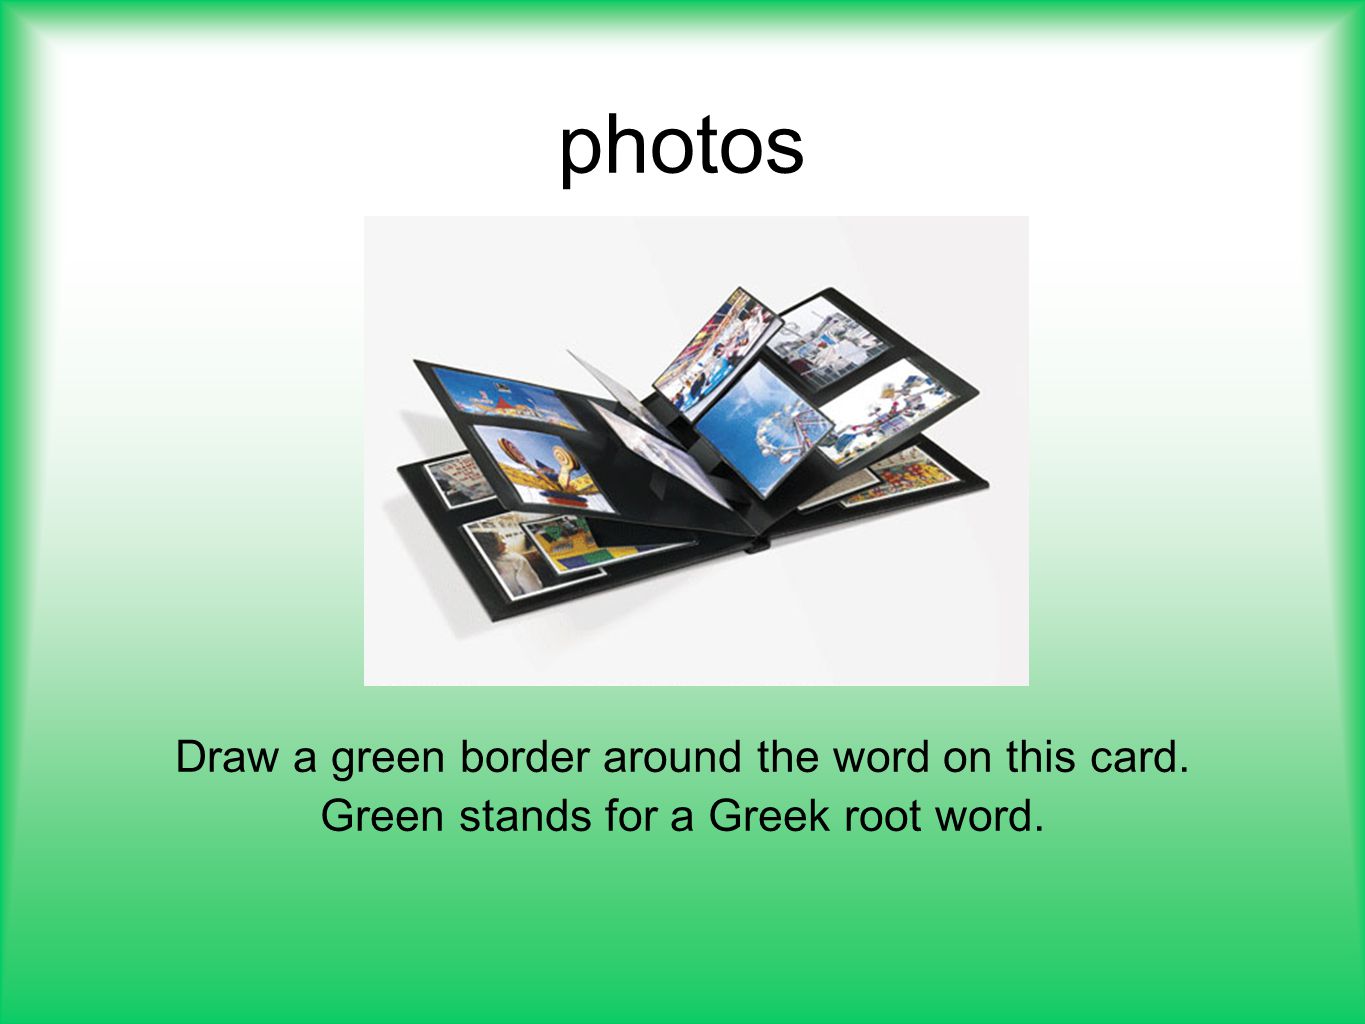 photos Draw a green border around the word on this card.